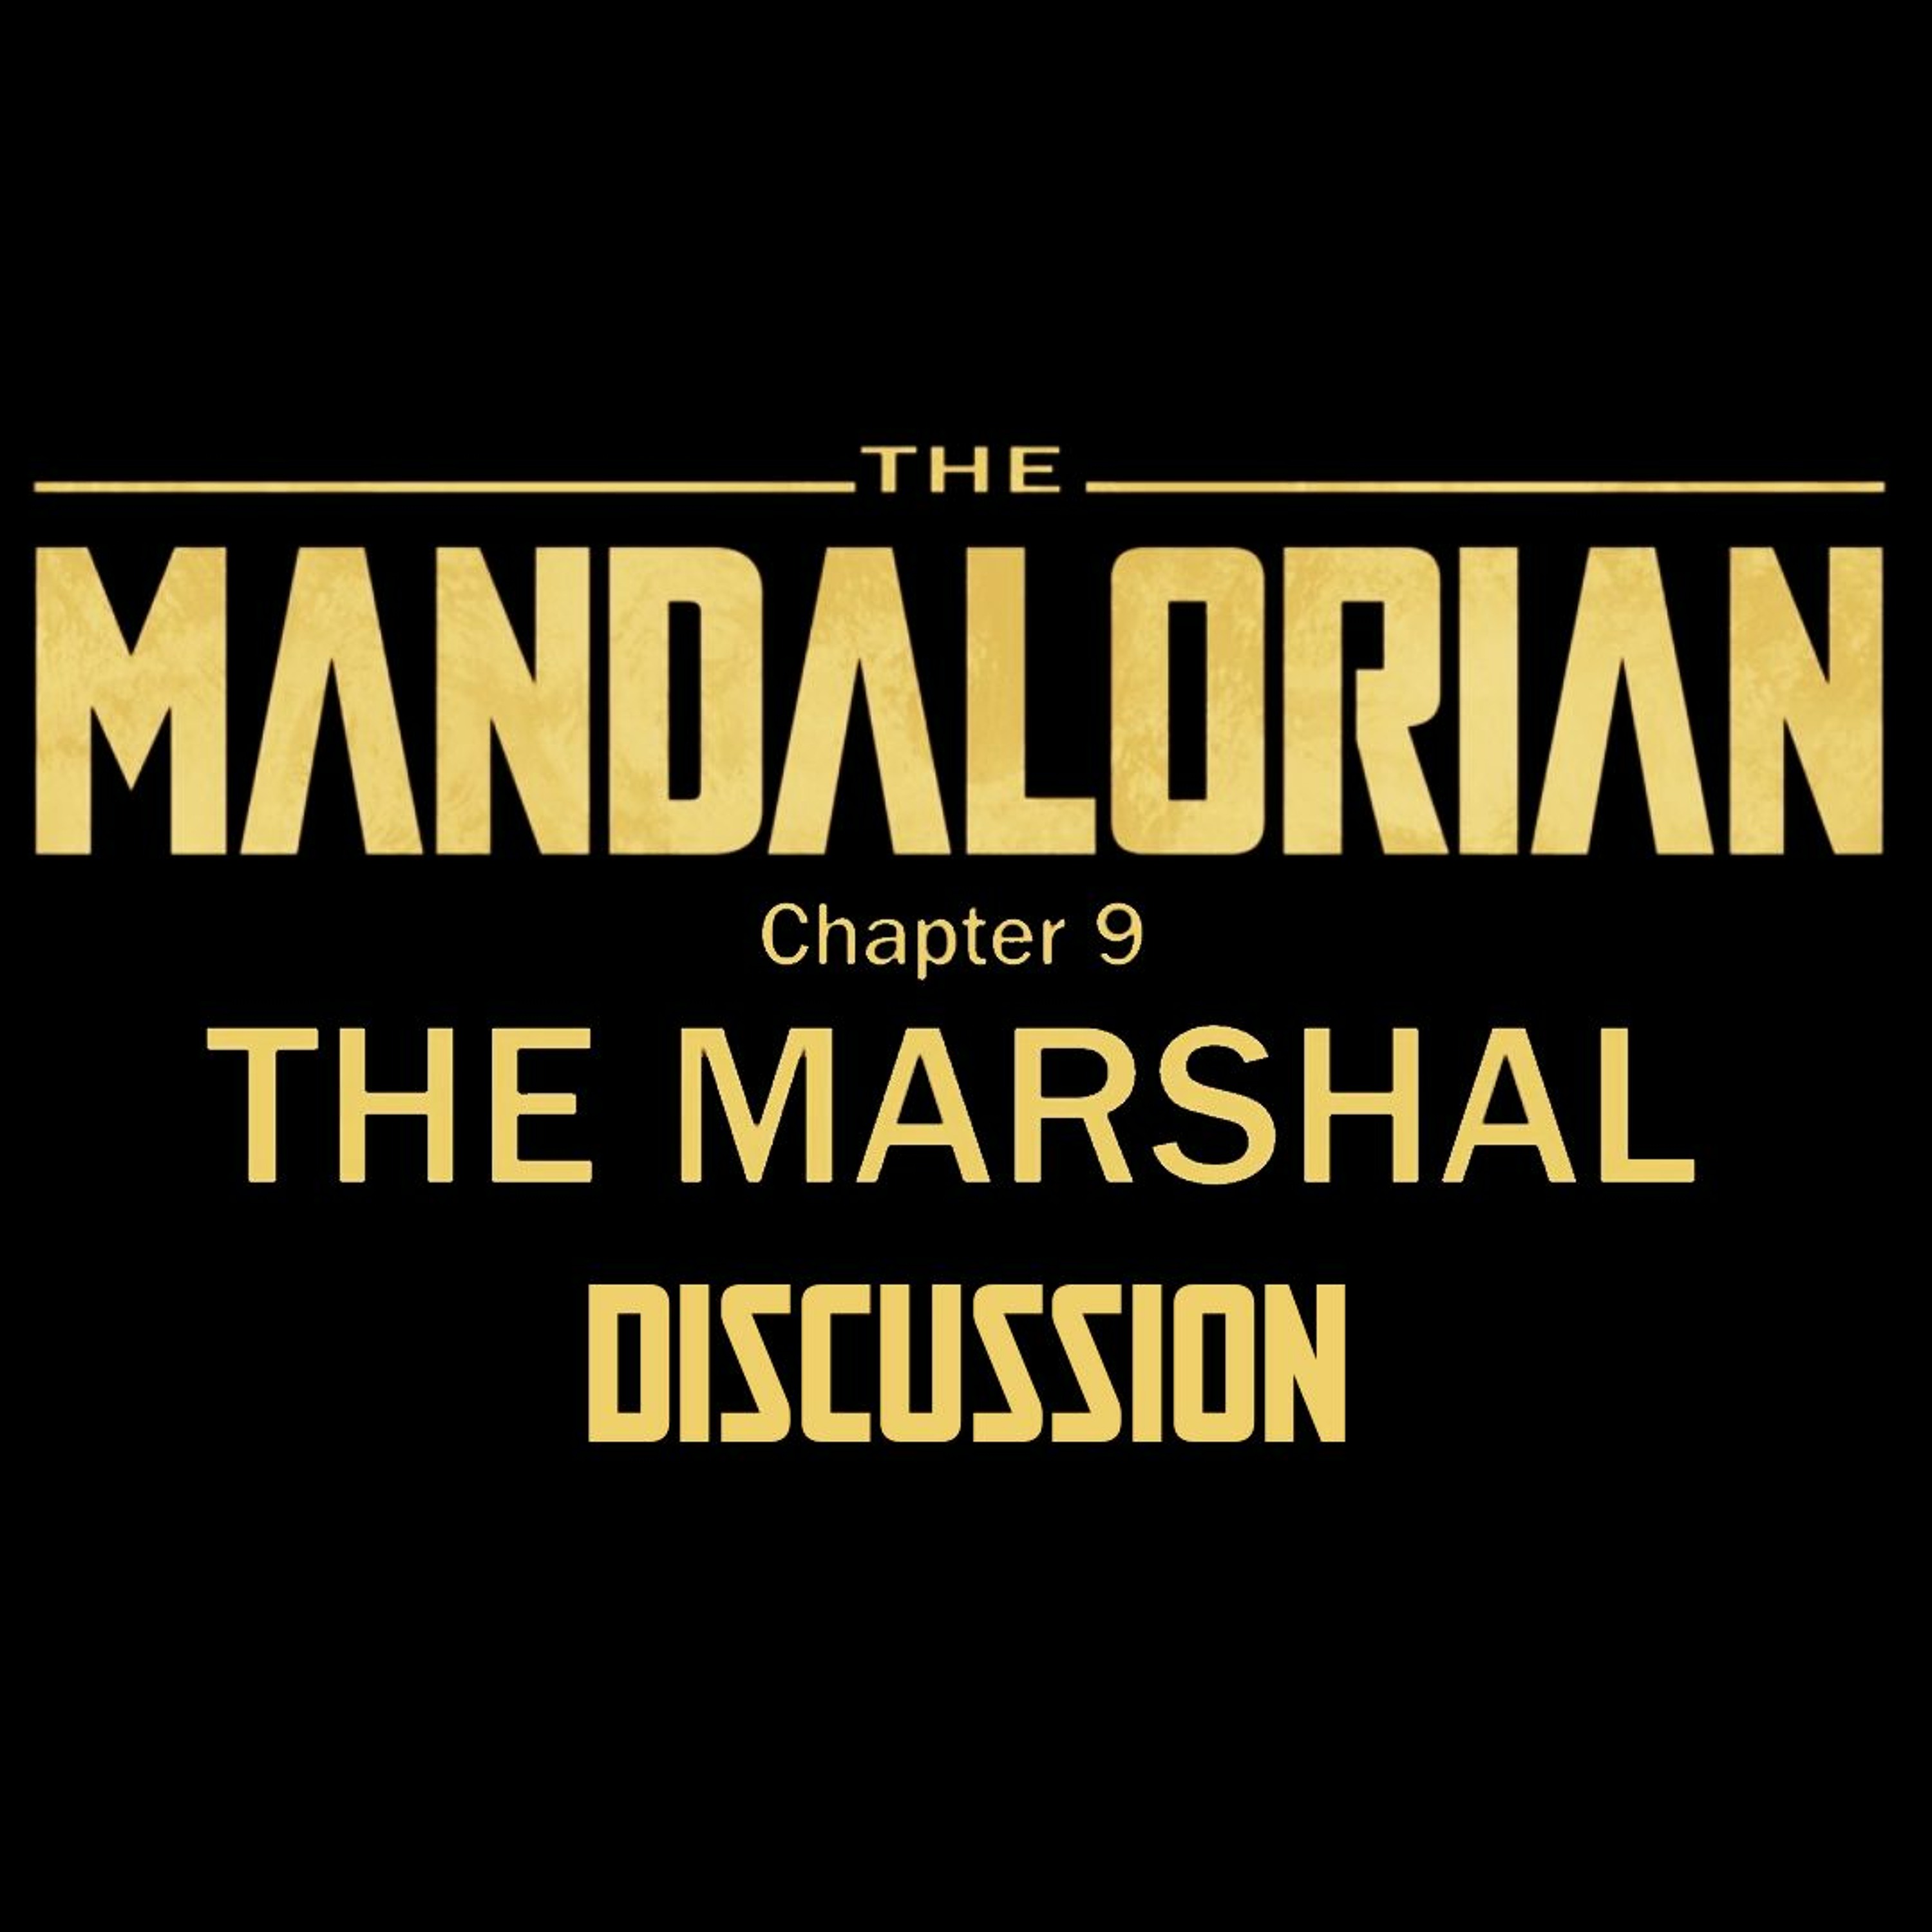 The Mandalorian Chapter 9 - The Marshal